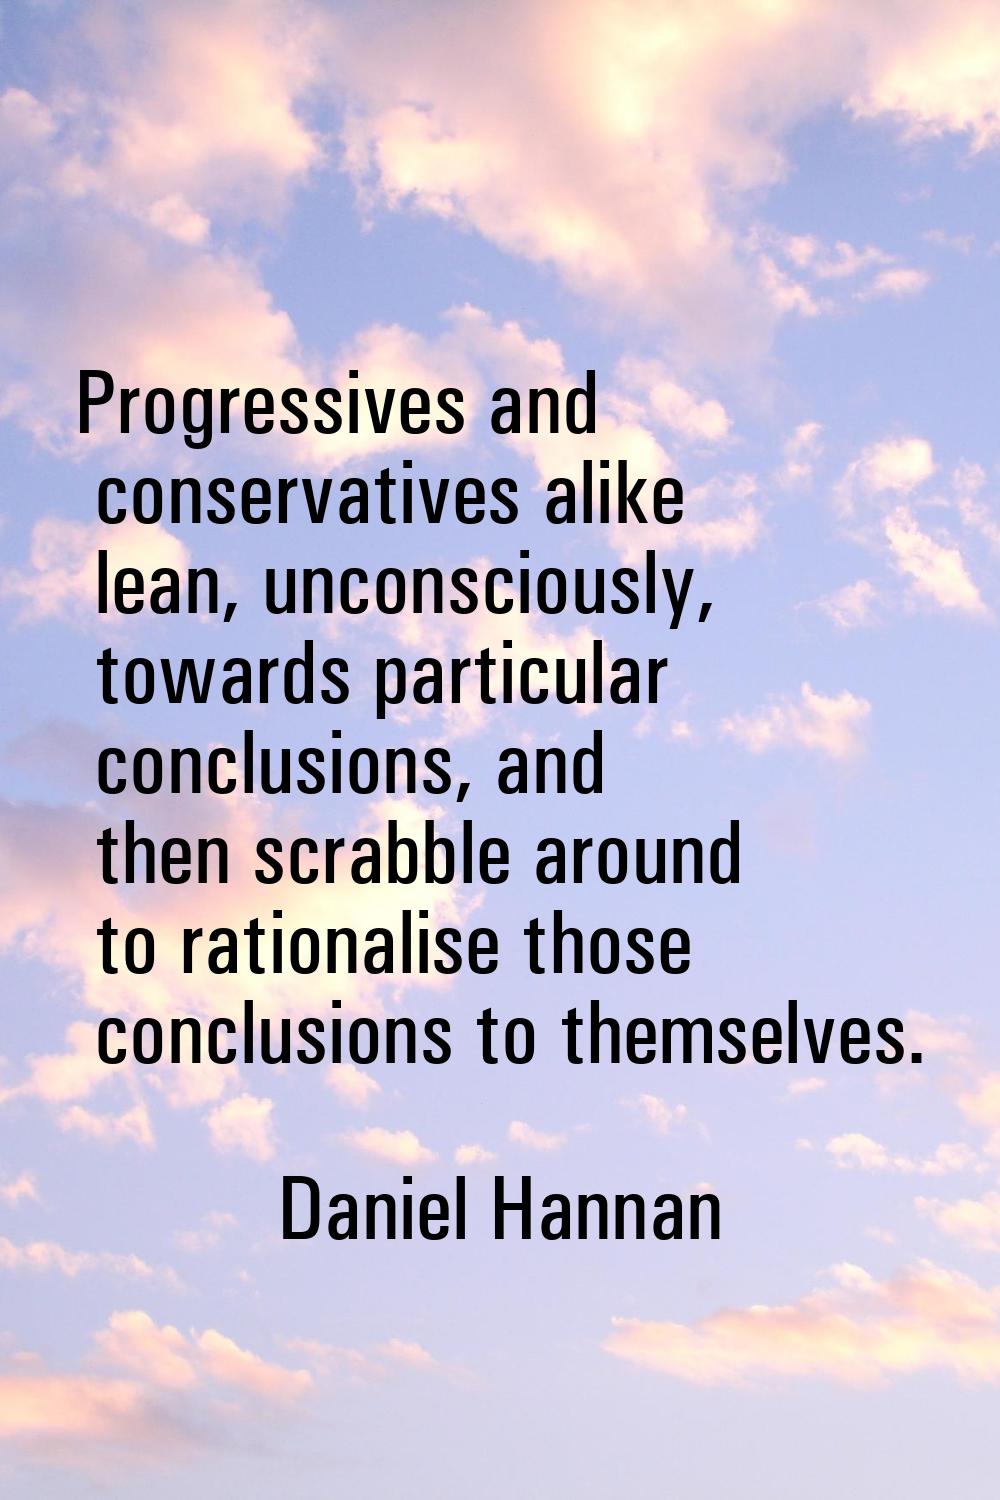 Progressives and conservatives alike lean, unconsciously, towards particular conclusions, and then 